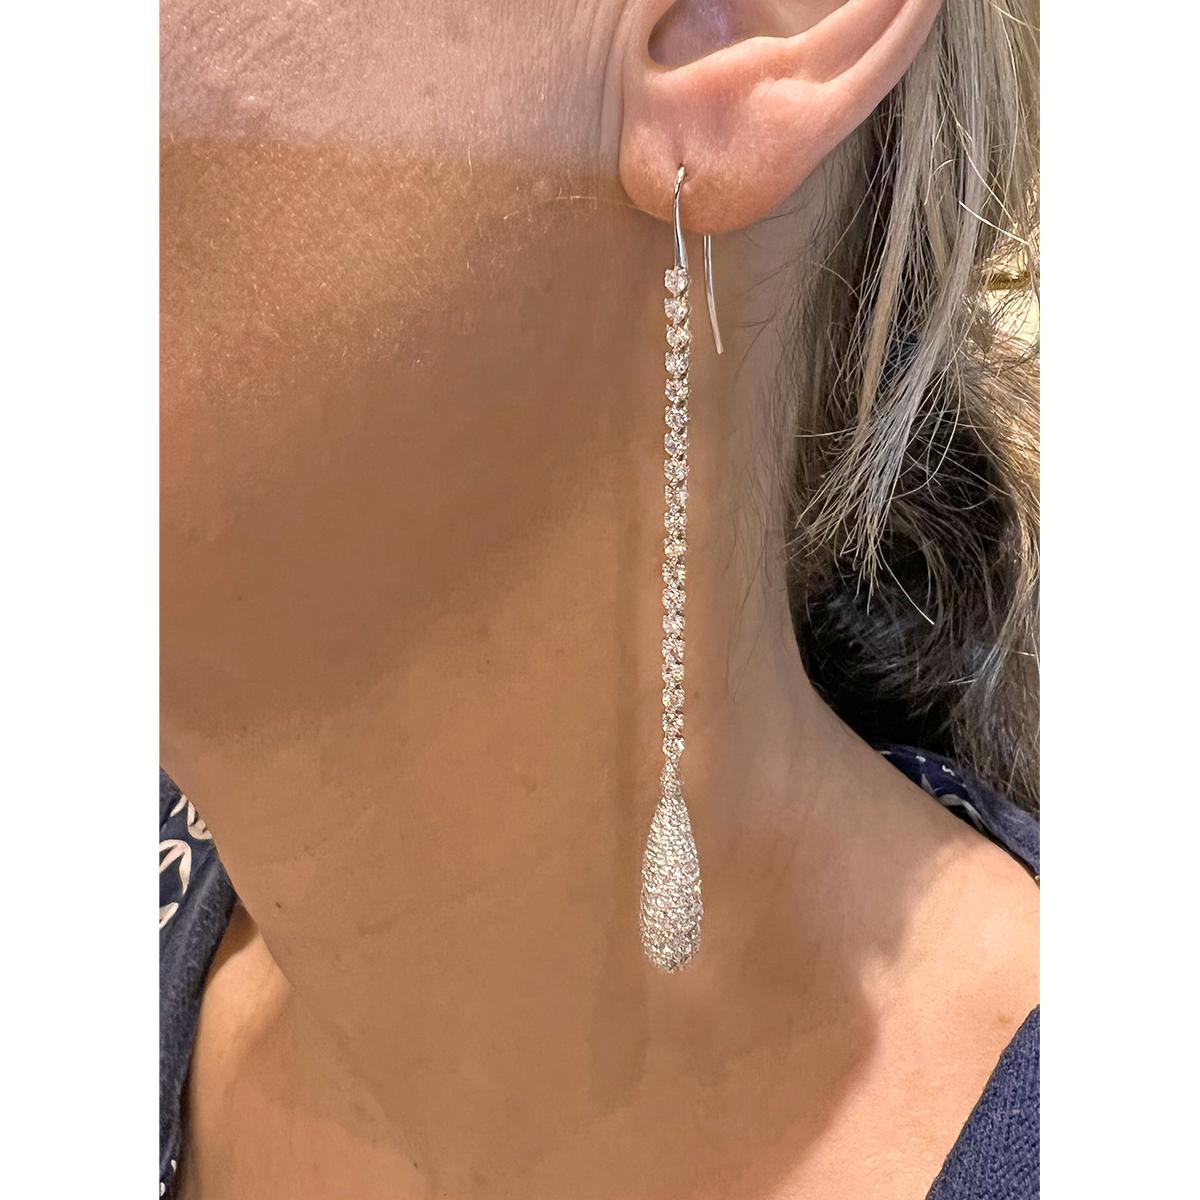 Jacob & Co. 18k White Gold Diamond Teardrop Earrings In Excellent Condition For Sale In Palm Beach, FL